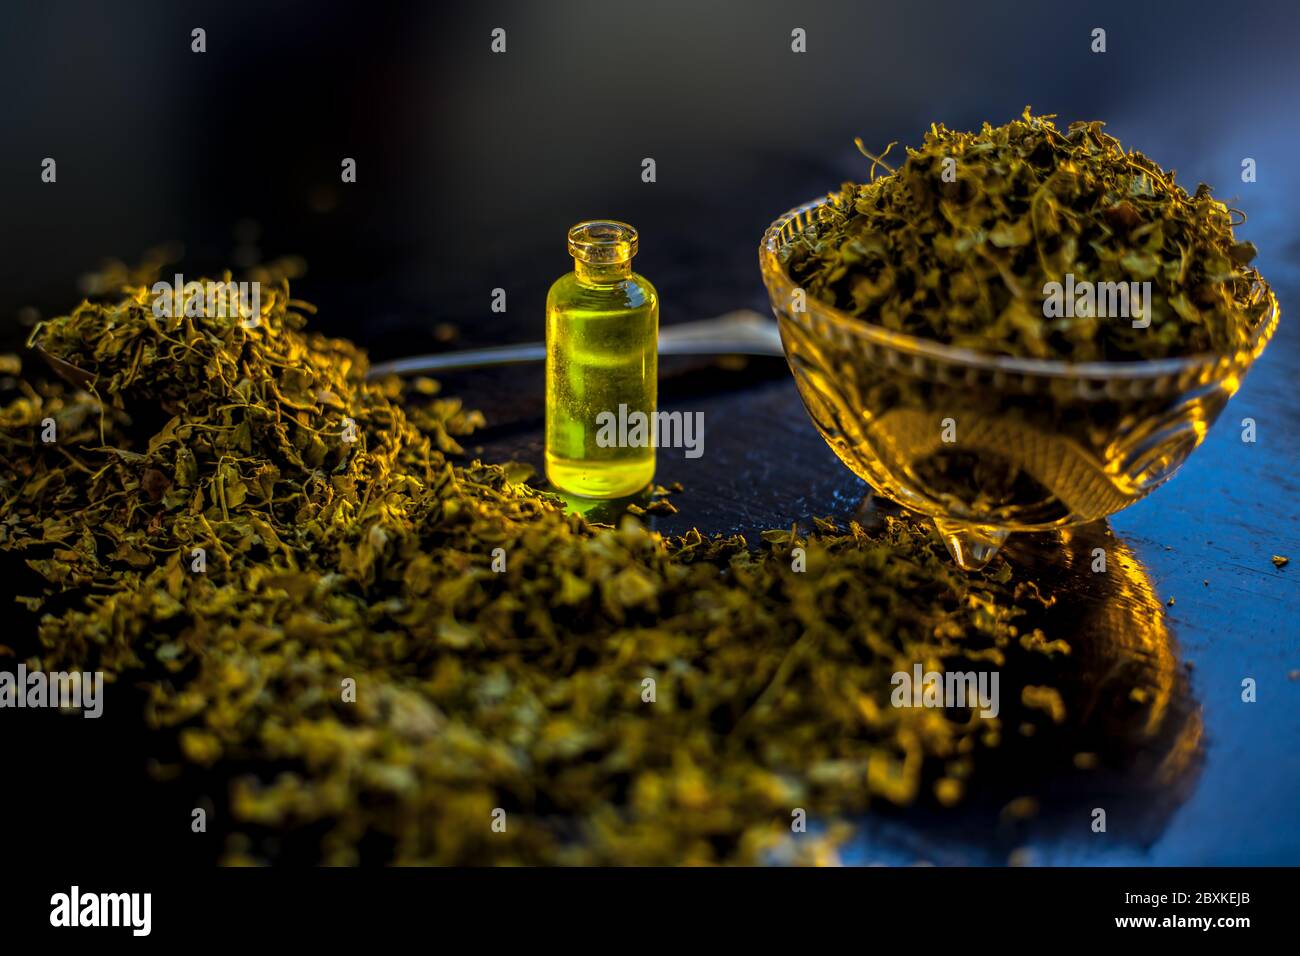 Essential extracted oil of Kasuri Methi or Dried Fenugreek Leaves in a small tiny bottle along with raw dried fenugreek leaves. Stock Photo